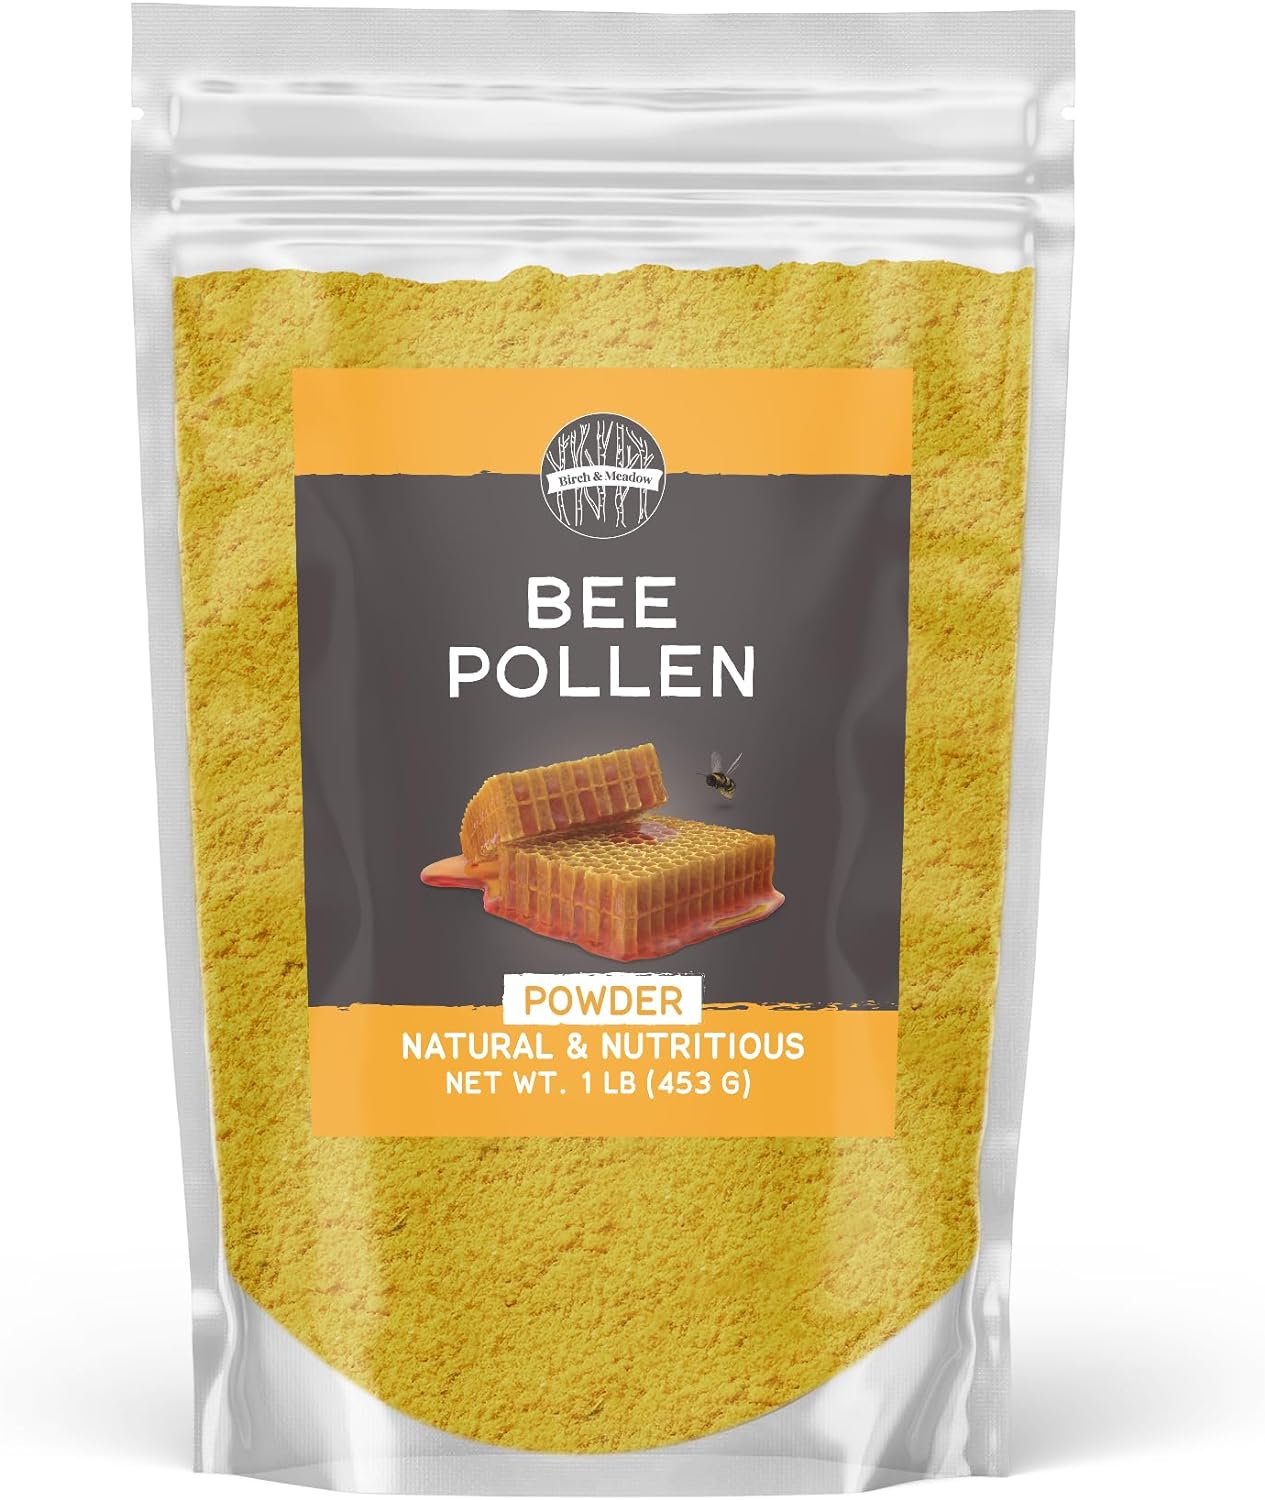 BIRCH & MEADOW Bee Pollen Powder, 1 lb, Natural & Nutritious, Slightly Sweet Taste, Oatmeal & Cereal